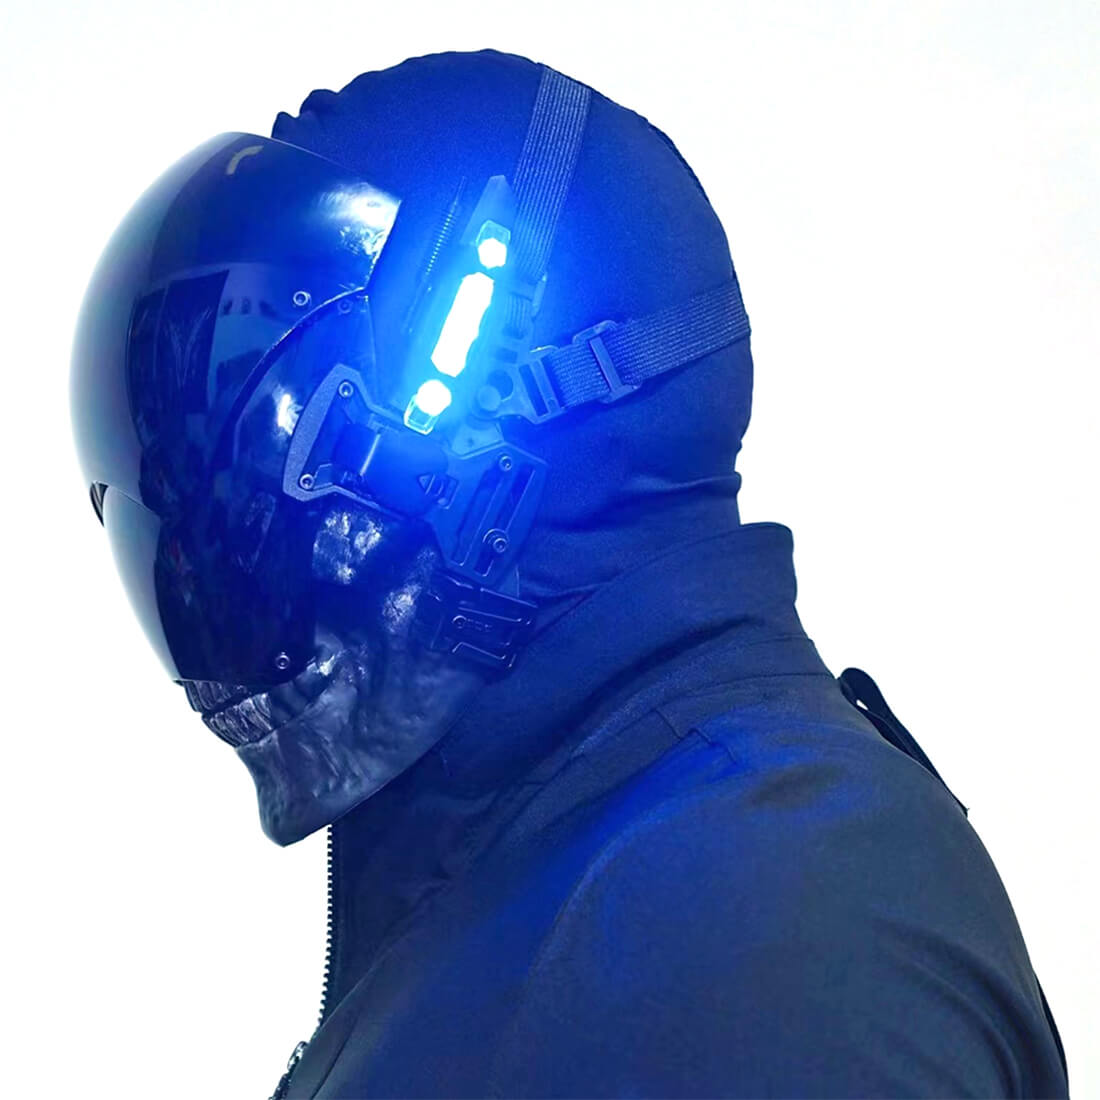 Punk Mask Helmet Cosplay for motorcycle Men and Women, Cool Mask Techwear,  Full-Face Mask Costume Accessory